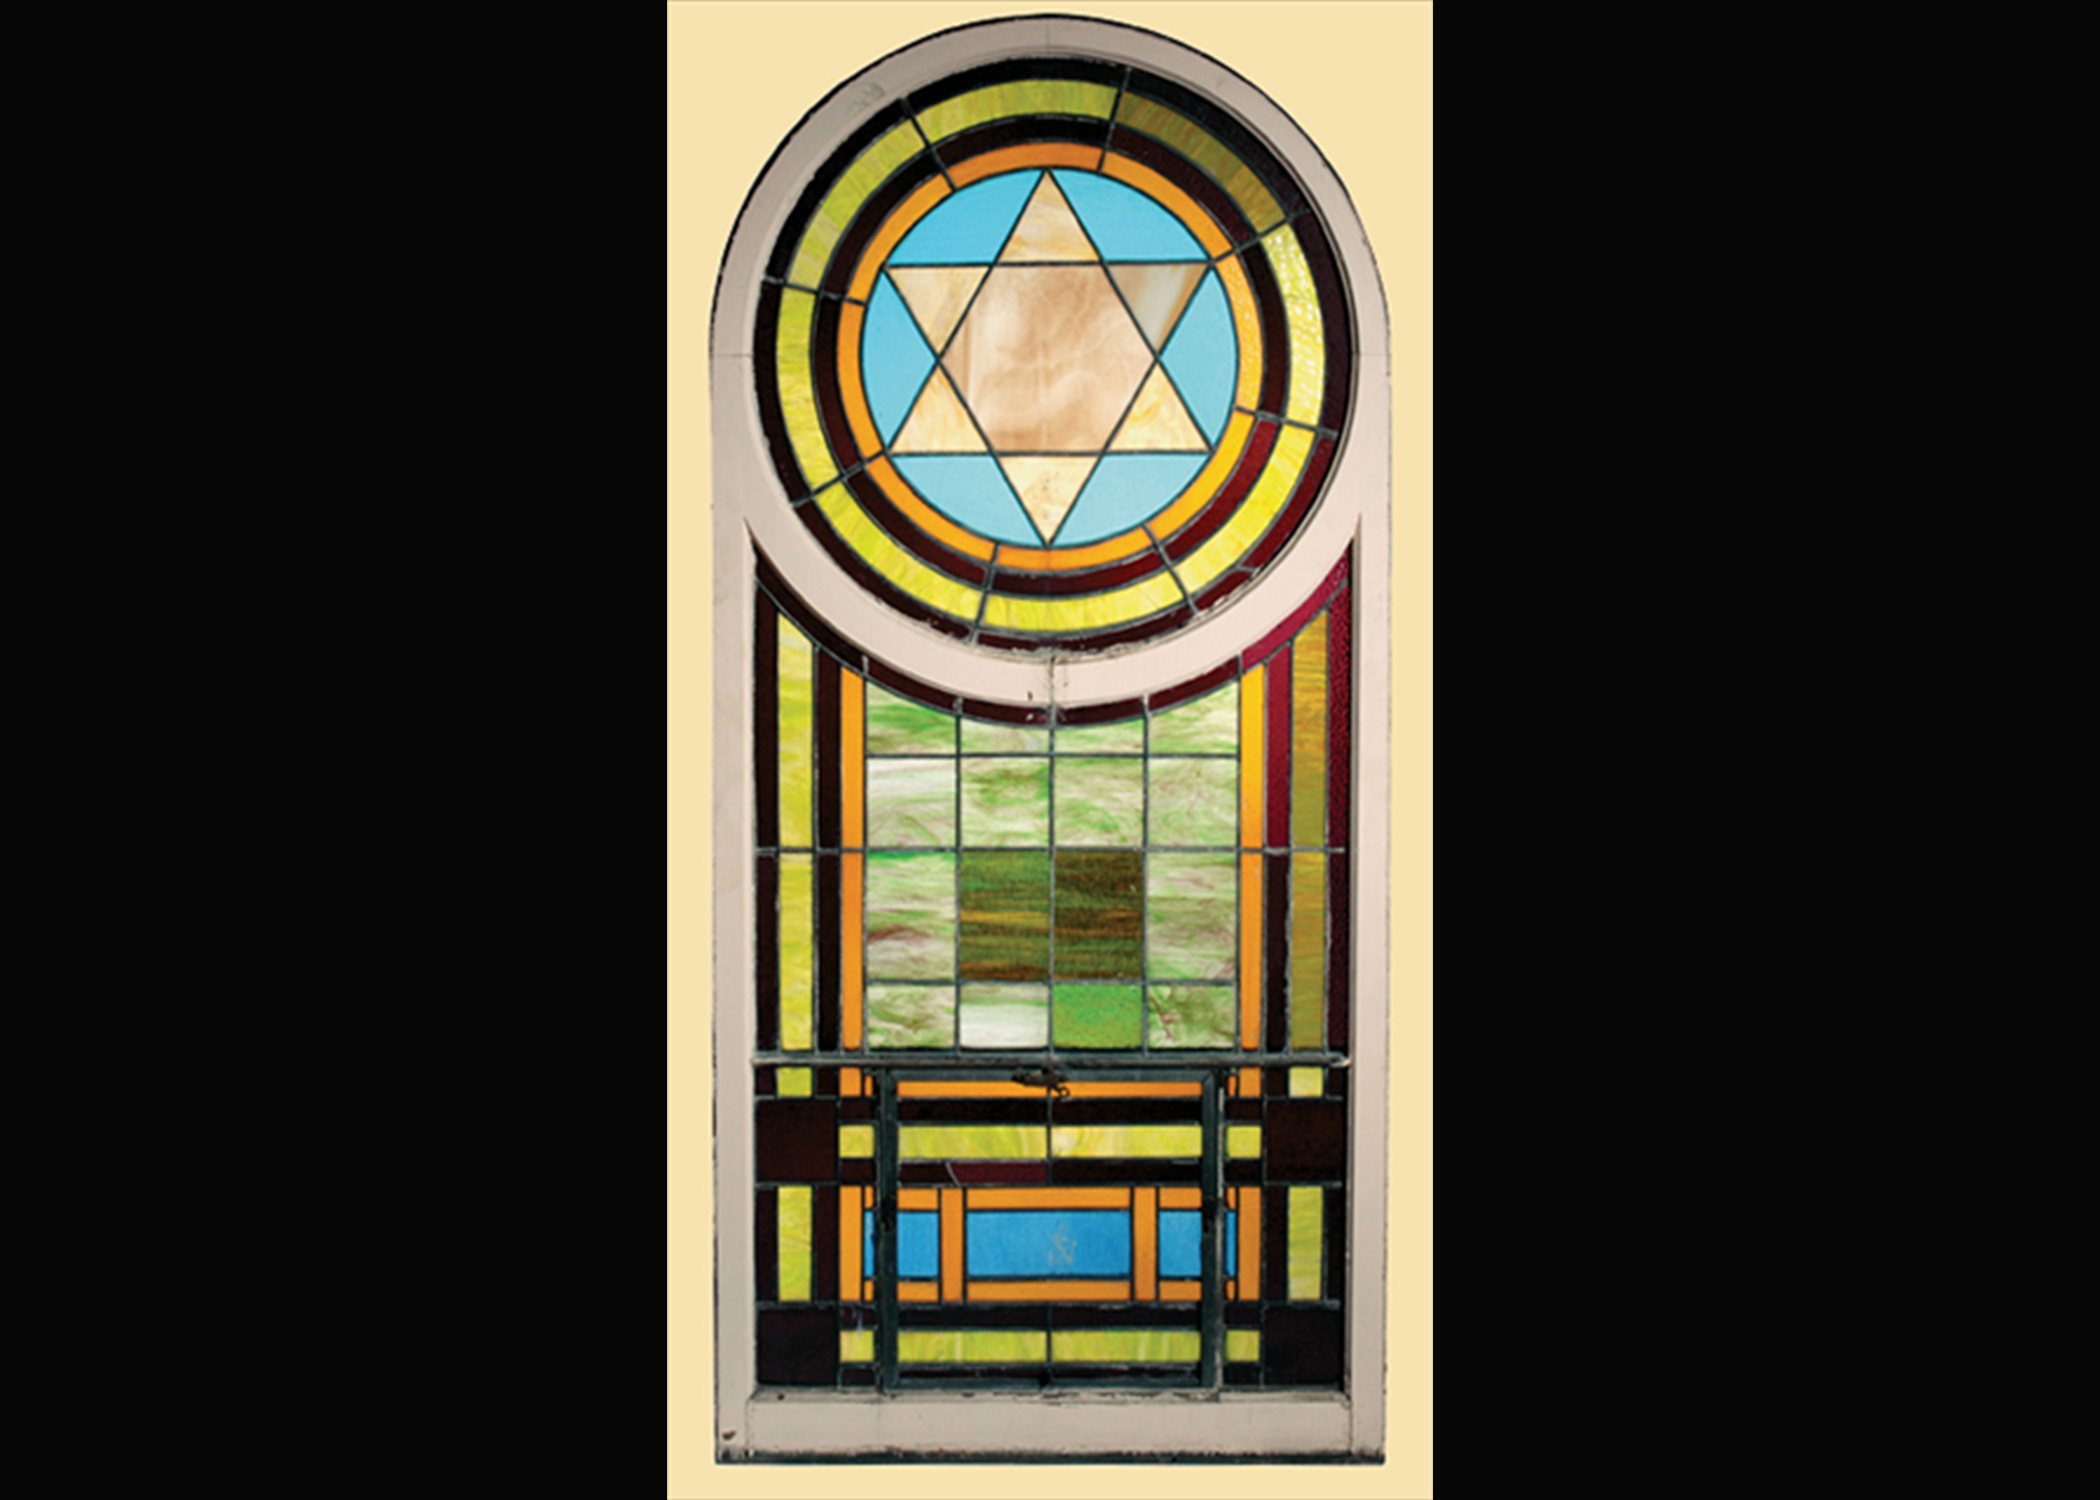 The White Shul’s Star of David window features blue, brown, and green glass in a circular pattern around a light brown Star of David. Below that is a pattern of green, brown, and blue glass in rectangular shapes. The entire piece is enclosed in a wooden frame. (Courtesy of the Wisconsin Historical Society)